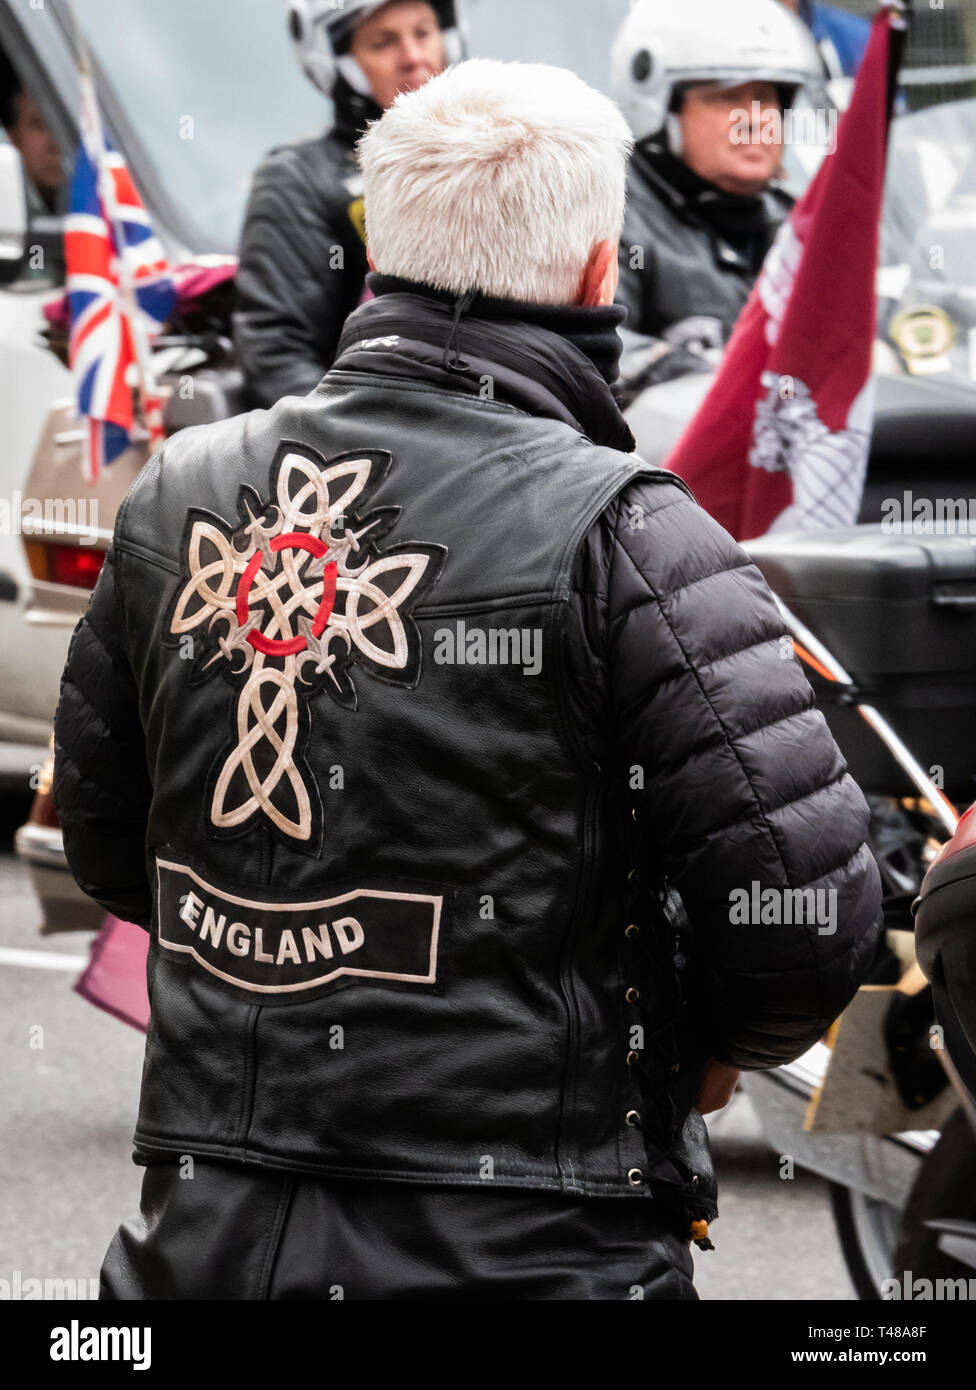 22000 motorbikes rode through London on 12th April 2019 to protest the prosecution of Soldier F for Bloody Sunday Stock Photo